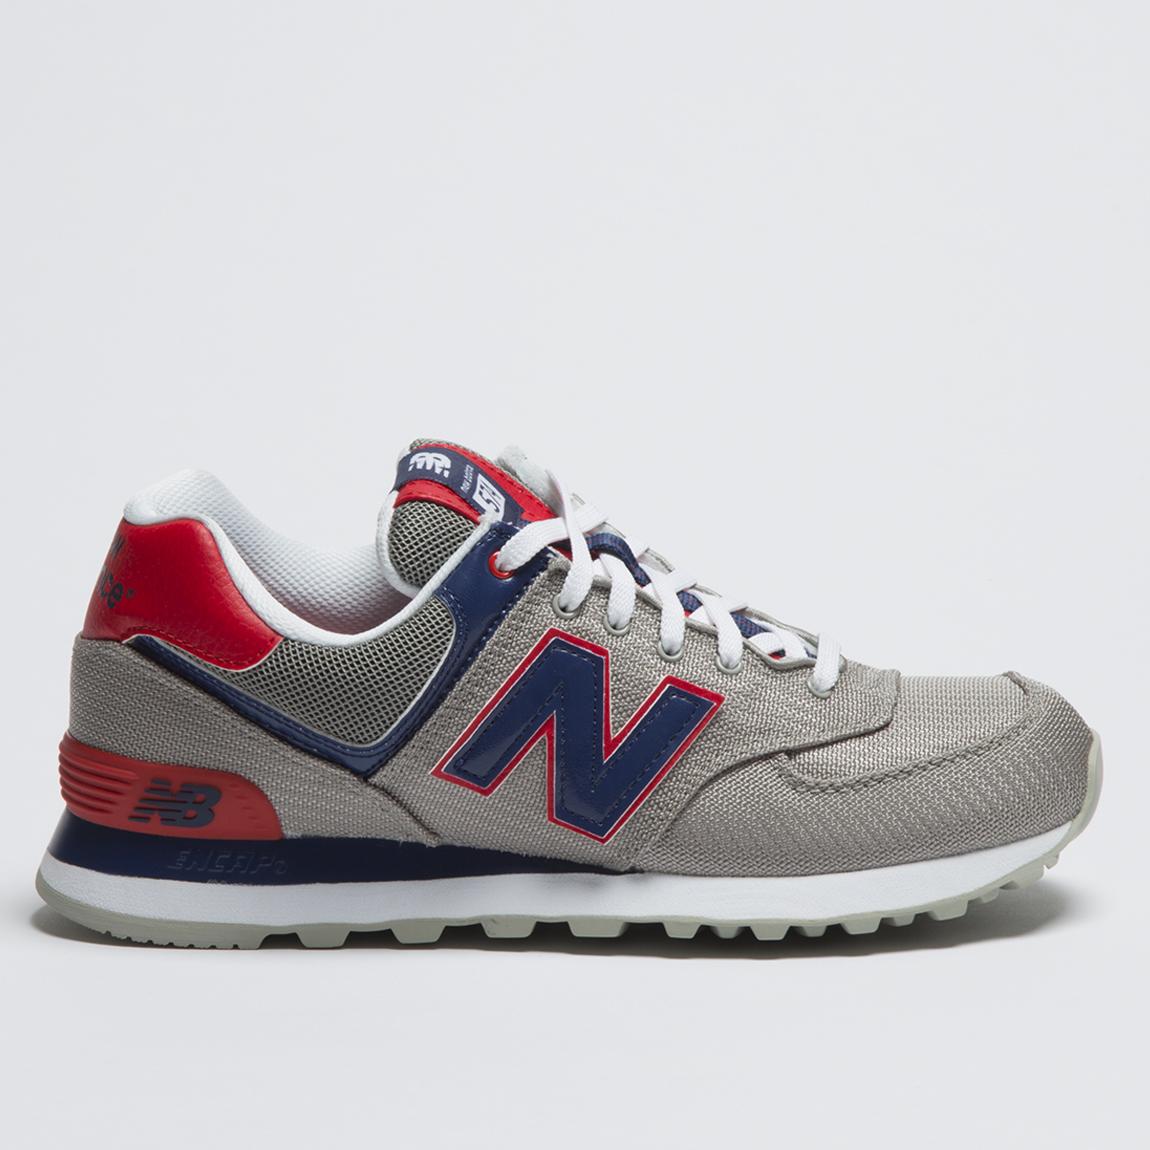 ML574PPG – Grey, Blue & Red New Balance Sneakers | Superbalist.com